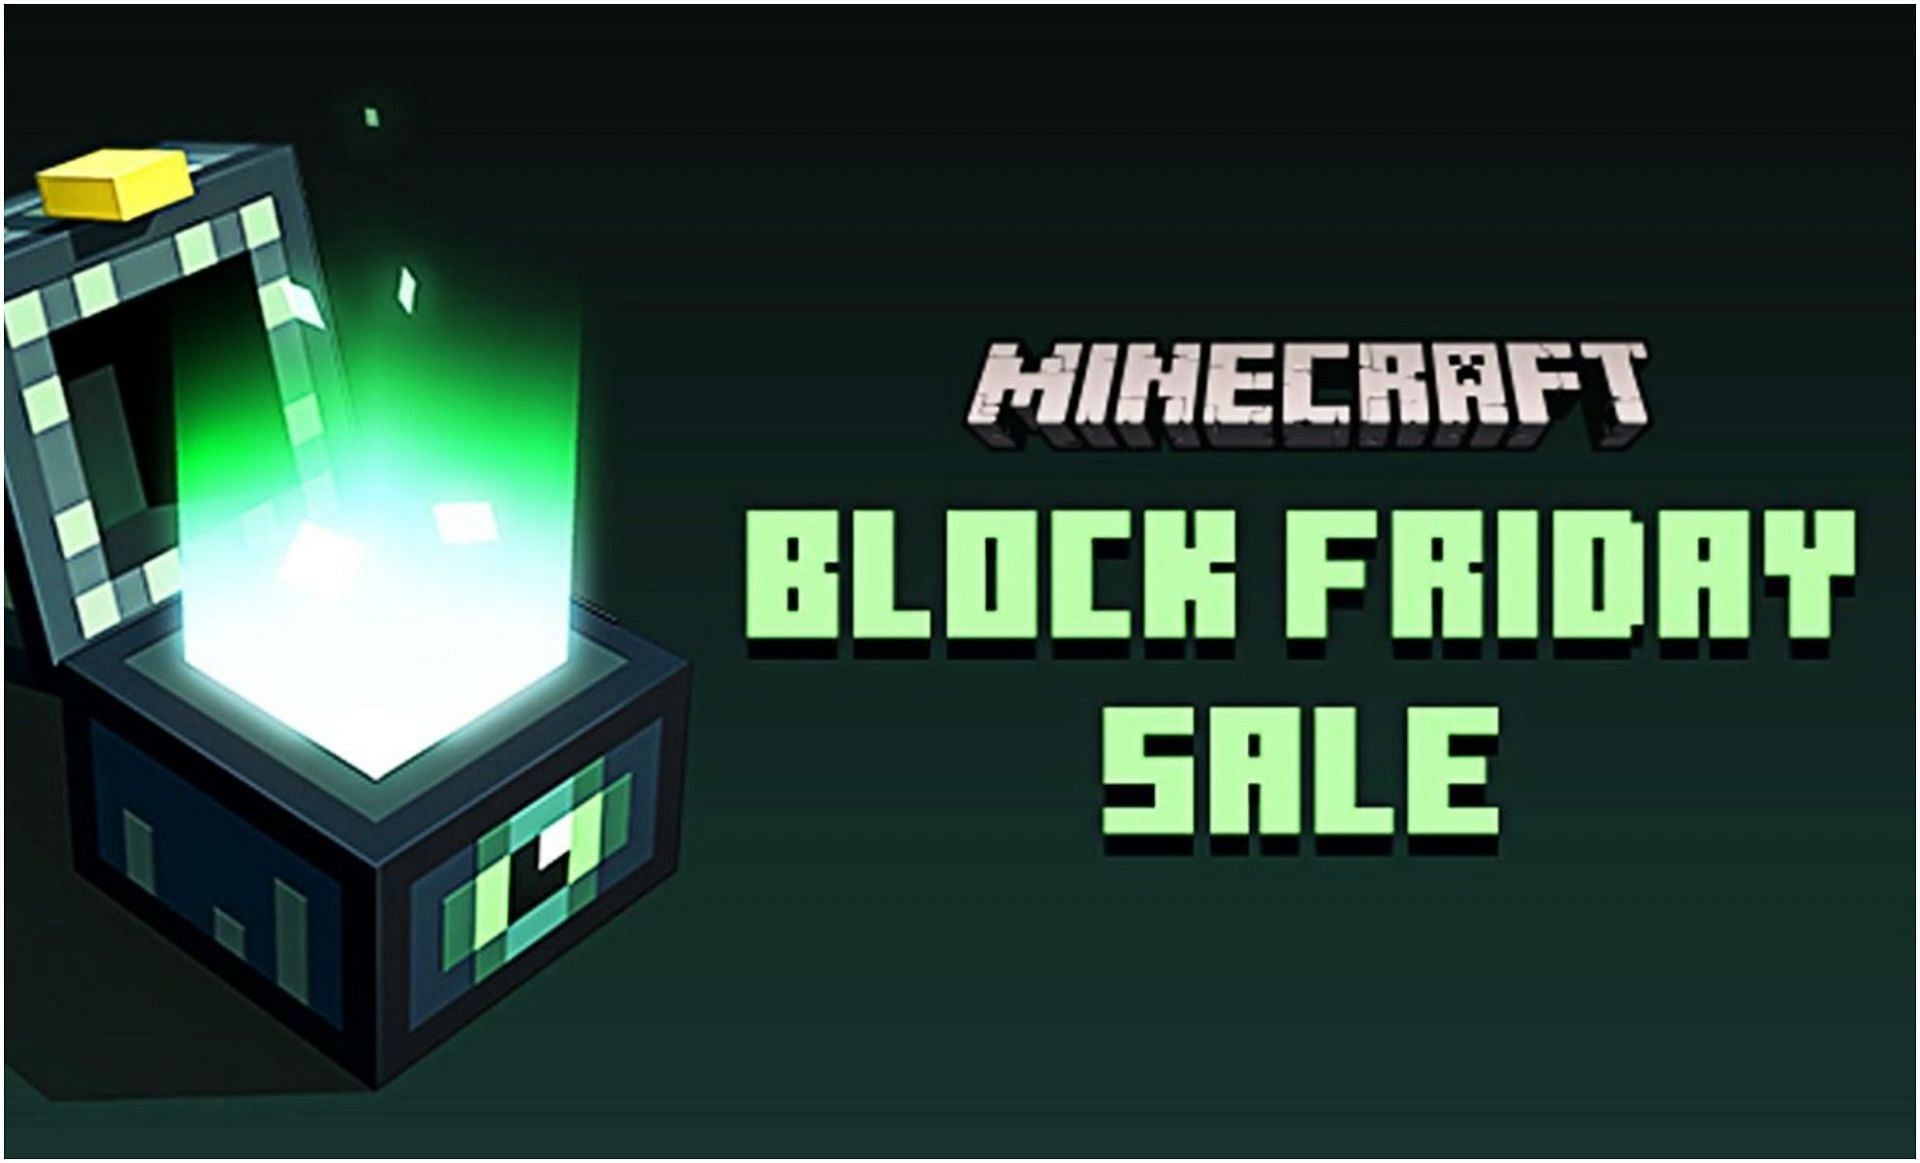 Minecraft Black Friday Sale 2021 Date, time, deals, free skins, and more